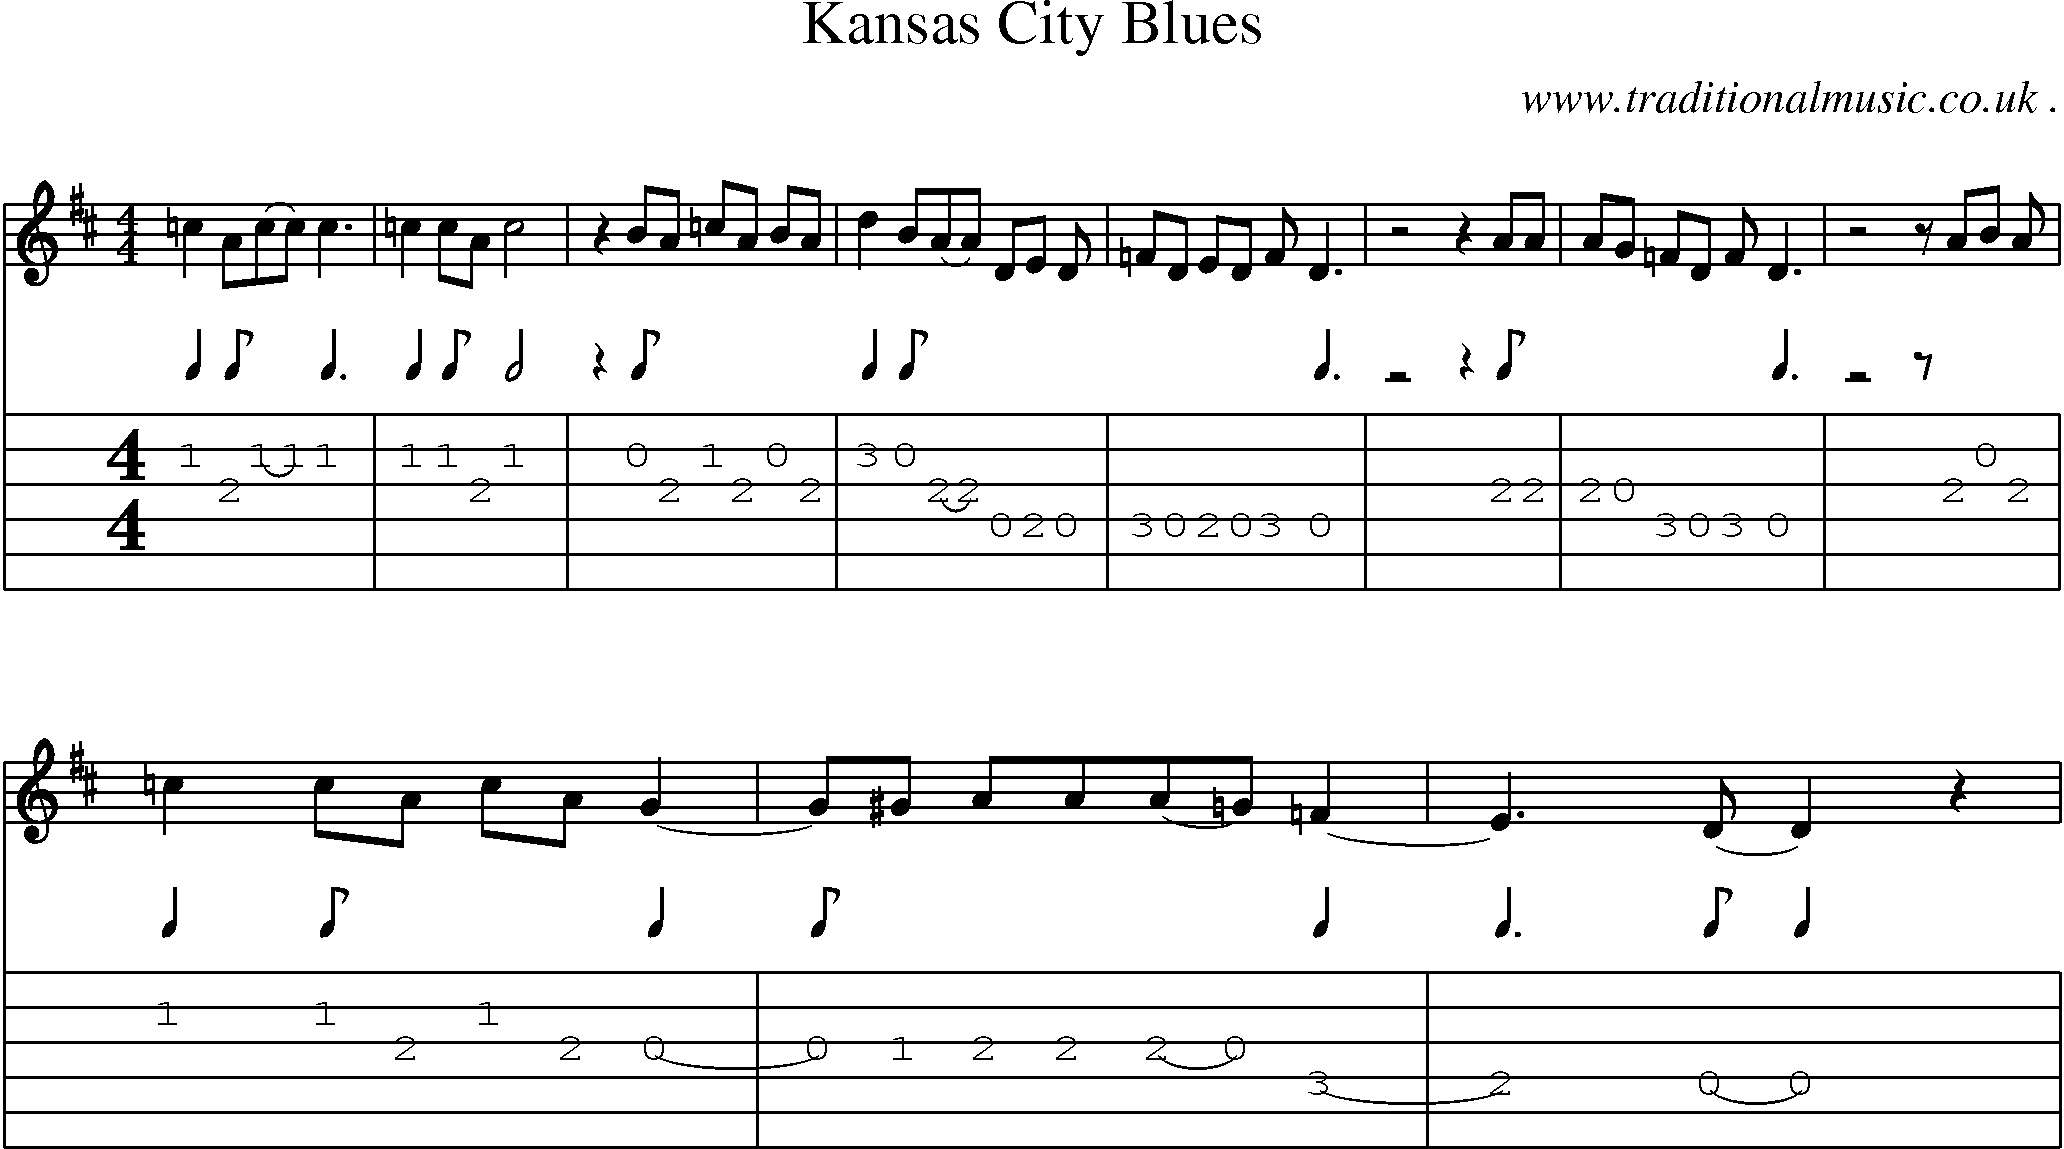 Music Score and Guitar Tabs for Kansas City Blues